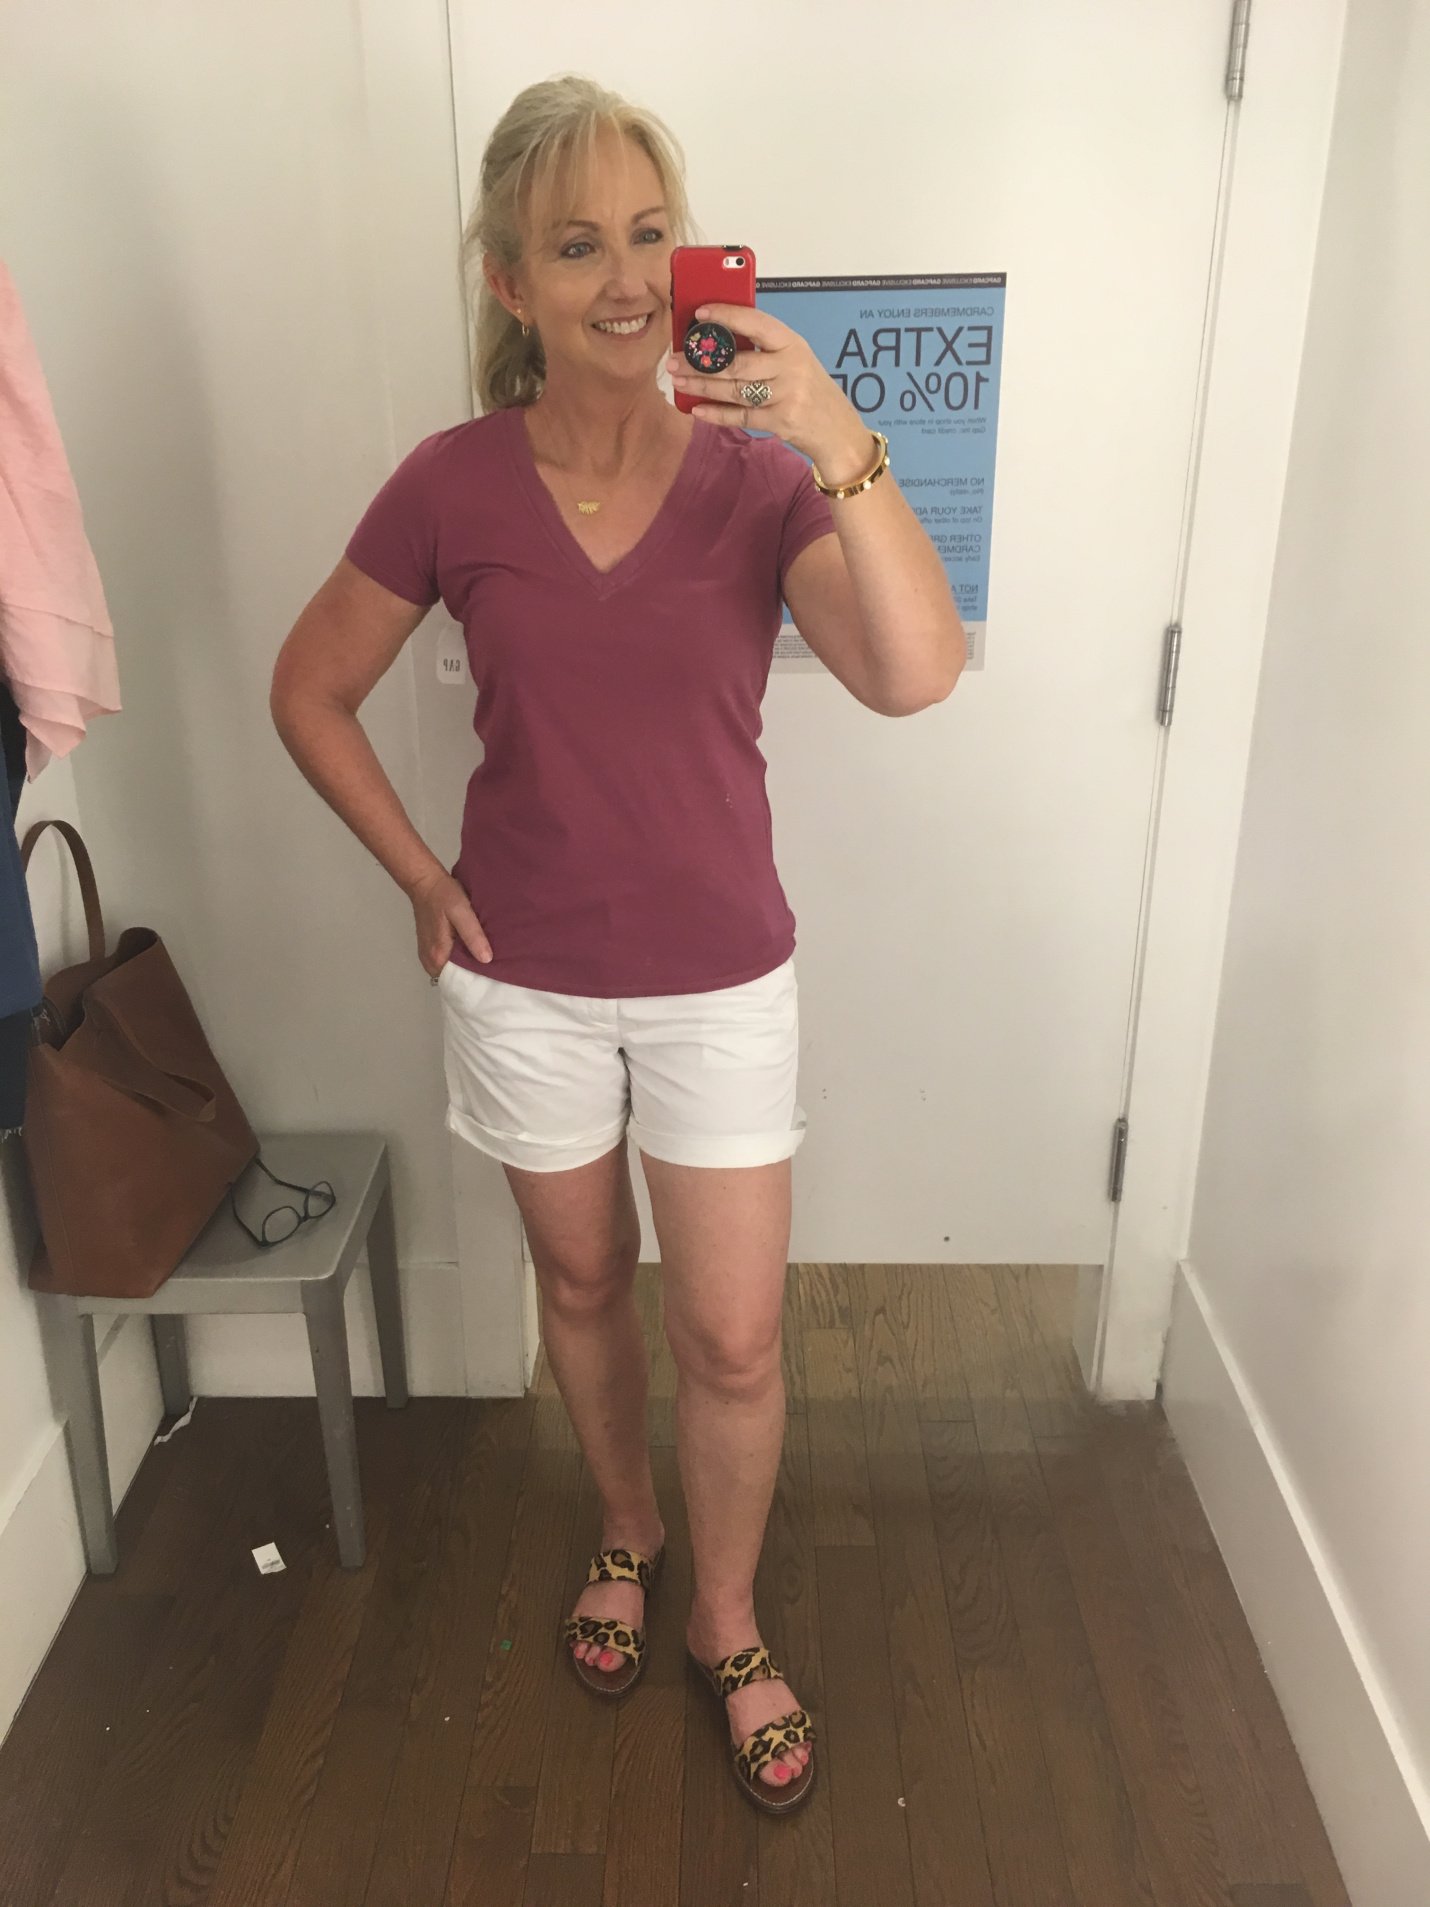 Try-On Session at Gap - Dressed for My Day